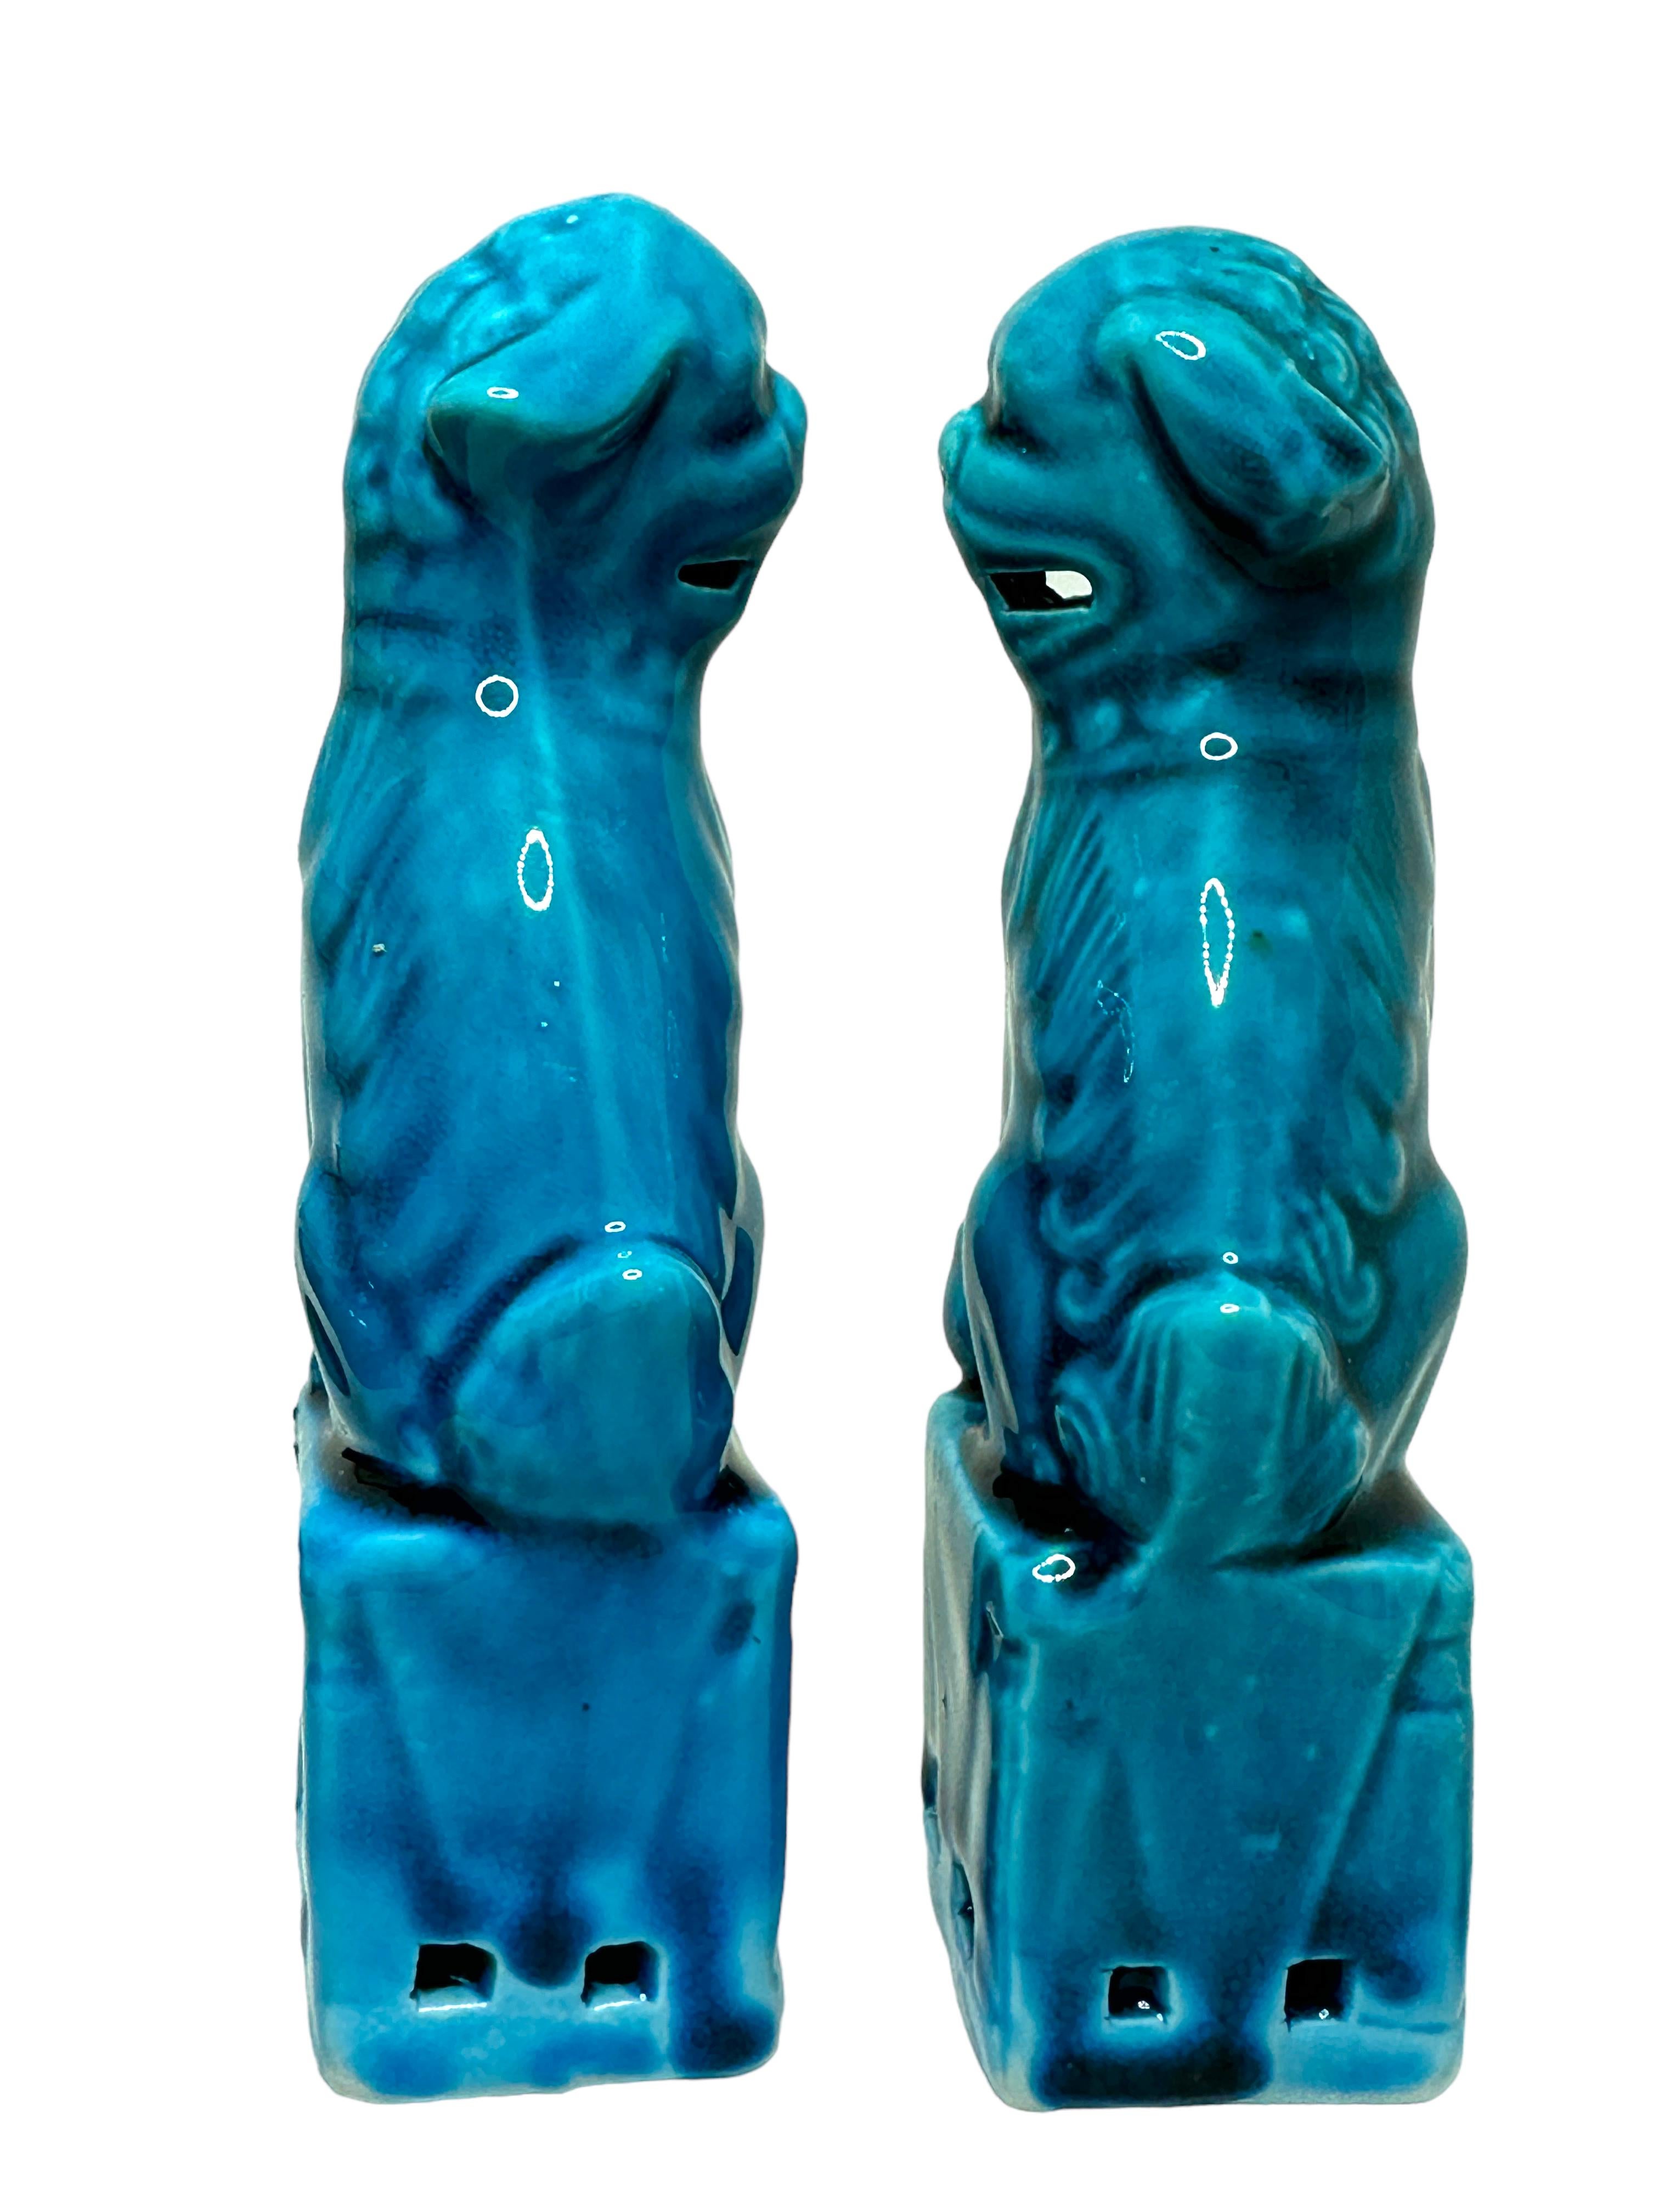 Chinese Pair of Decorative Turquoise Blue Foo Dogs Sculptures, Ceramic Statue For Sale